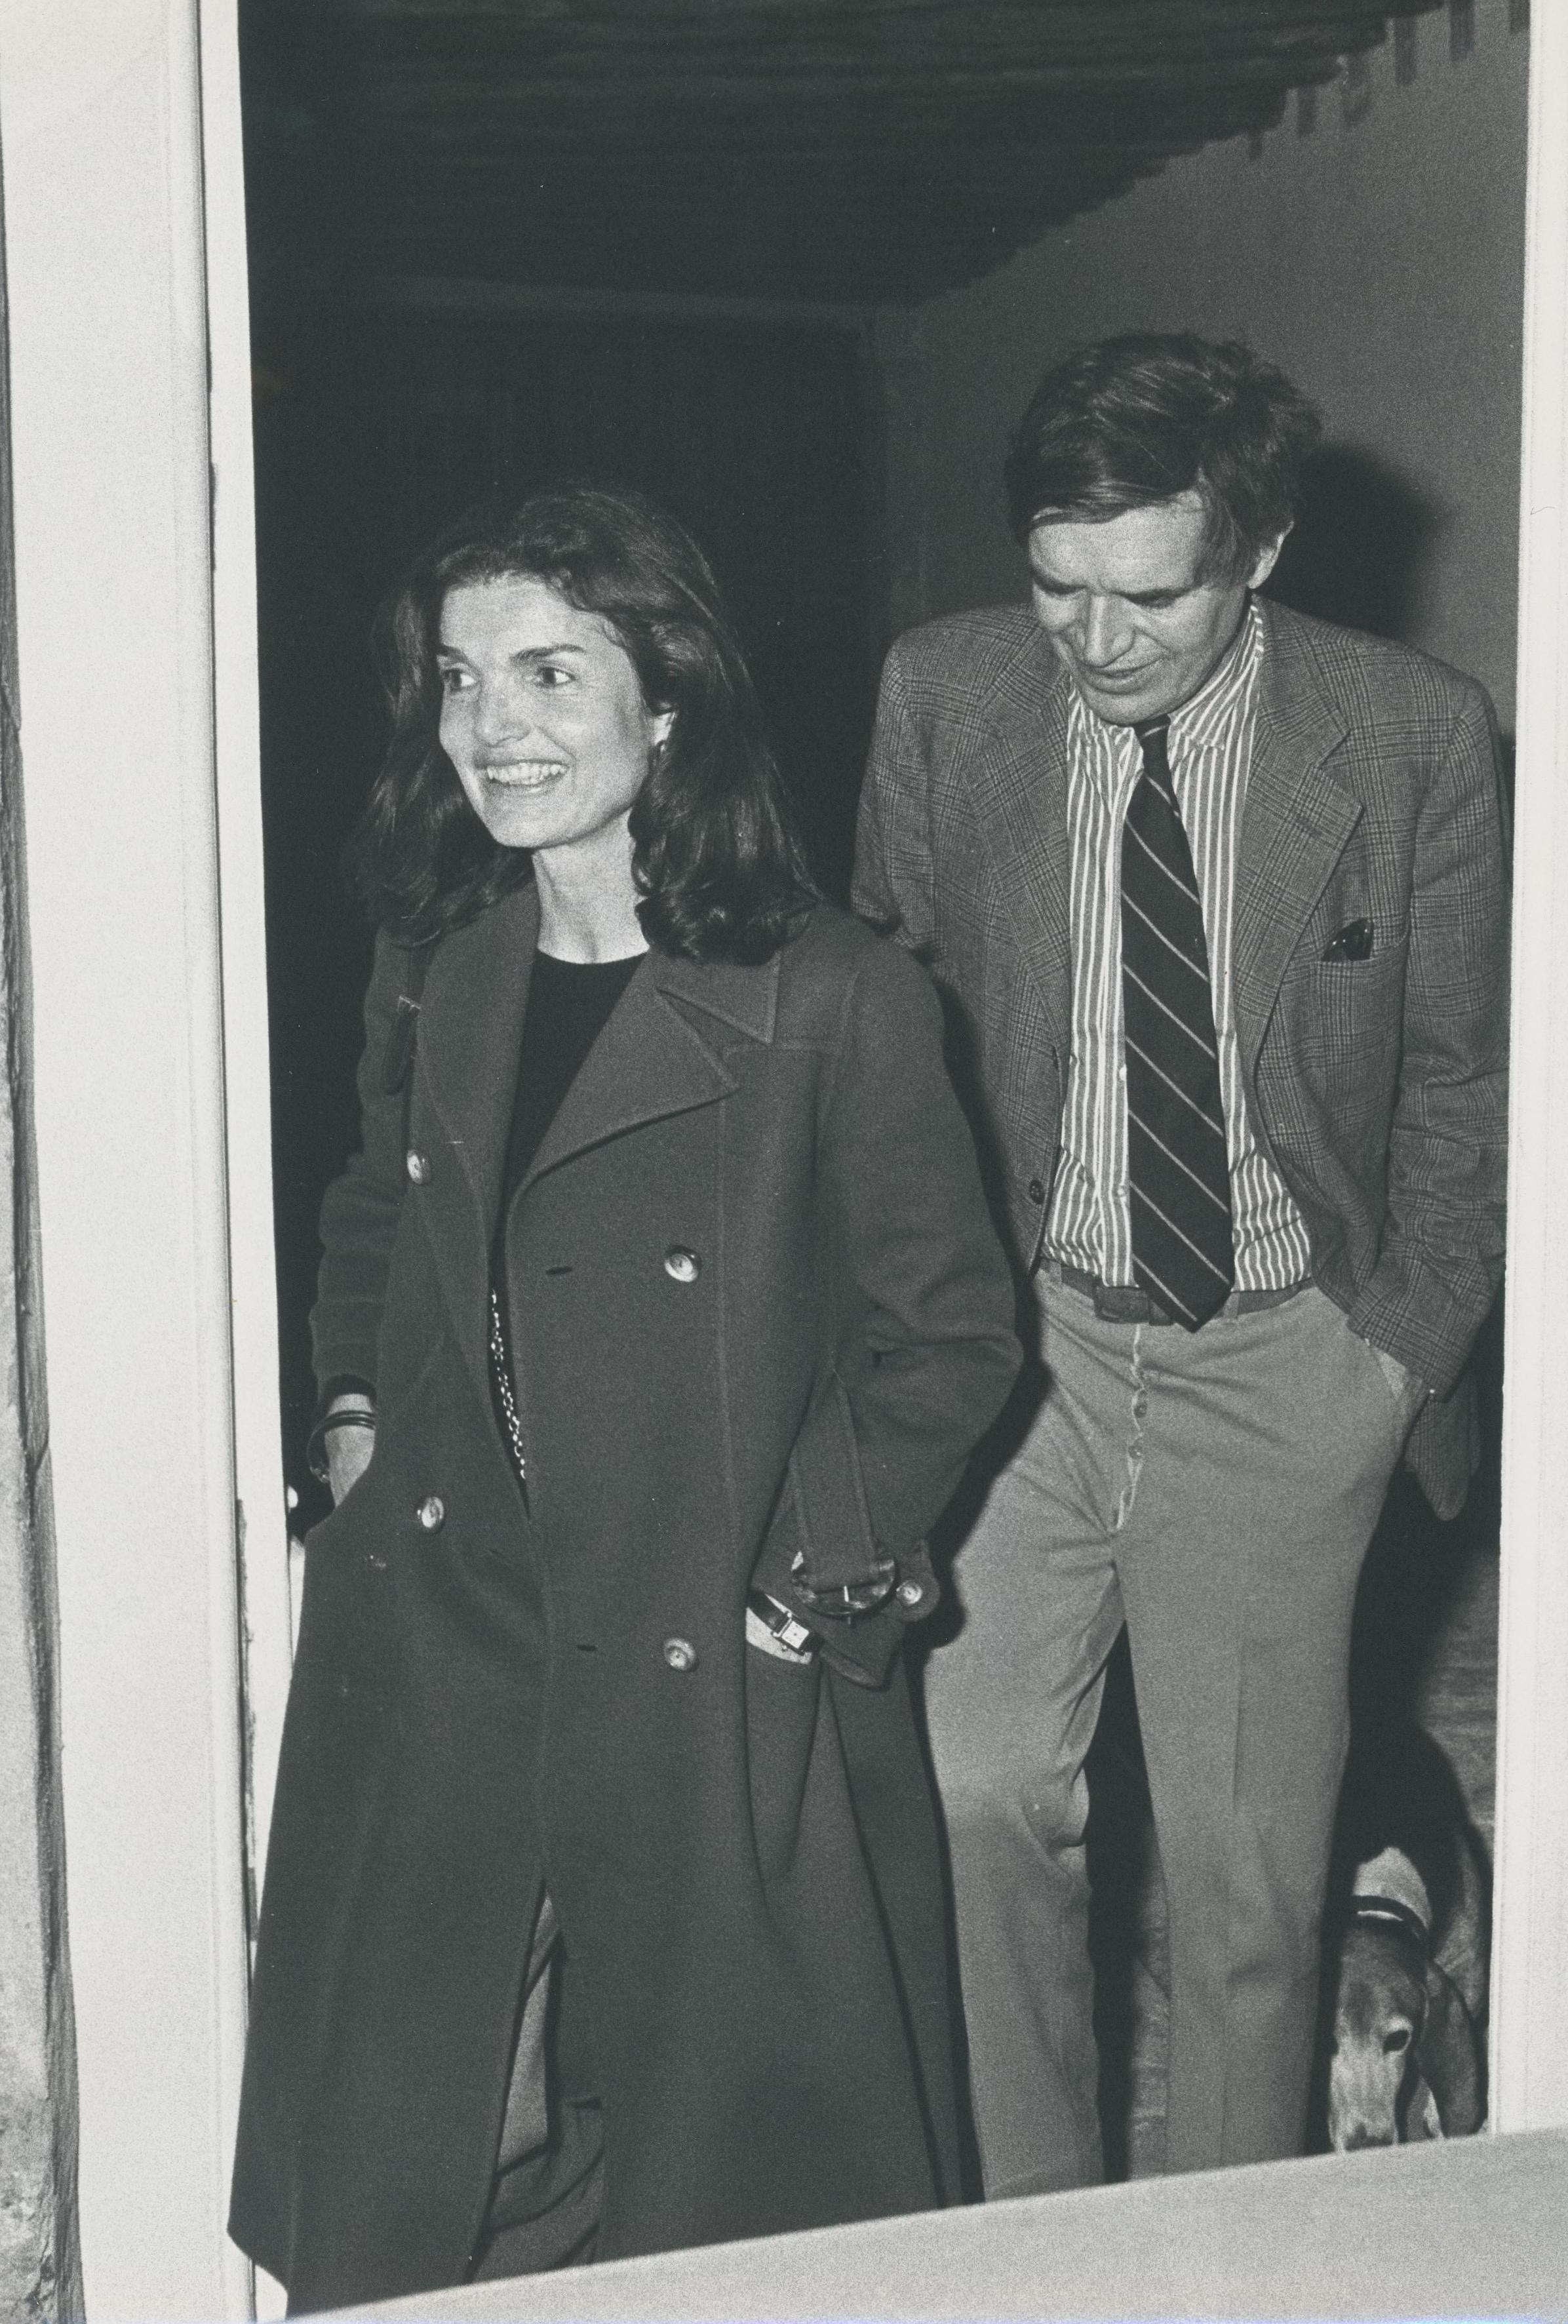 Jacqueline Lee "Jackie" Kennedy Onassis (July 28, 1929 – May 19, 1994) was an American socialite, writer, and photographer who became First Lady of the United States as the wife of President John F. Kennedy. Her popularity as First Lady was due to